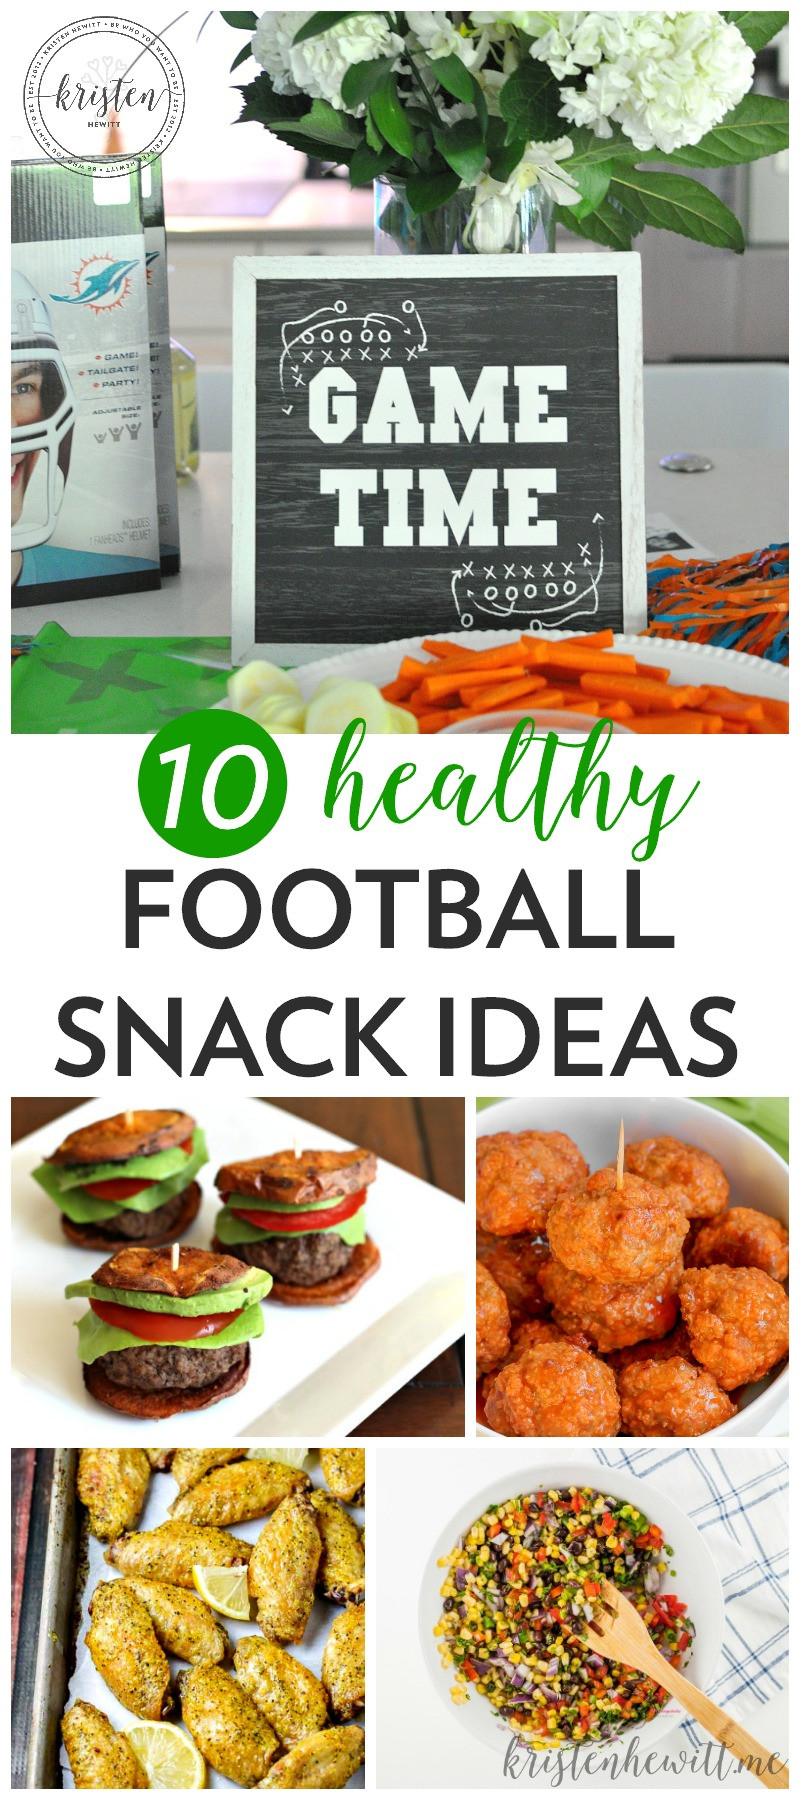 Healthy Football Party Snacks
 10 healthy football snacks and game day party ideas